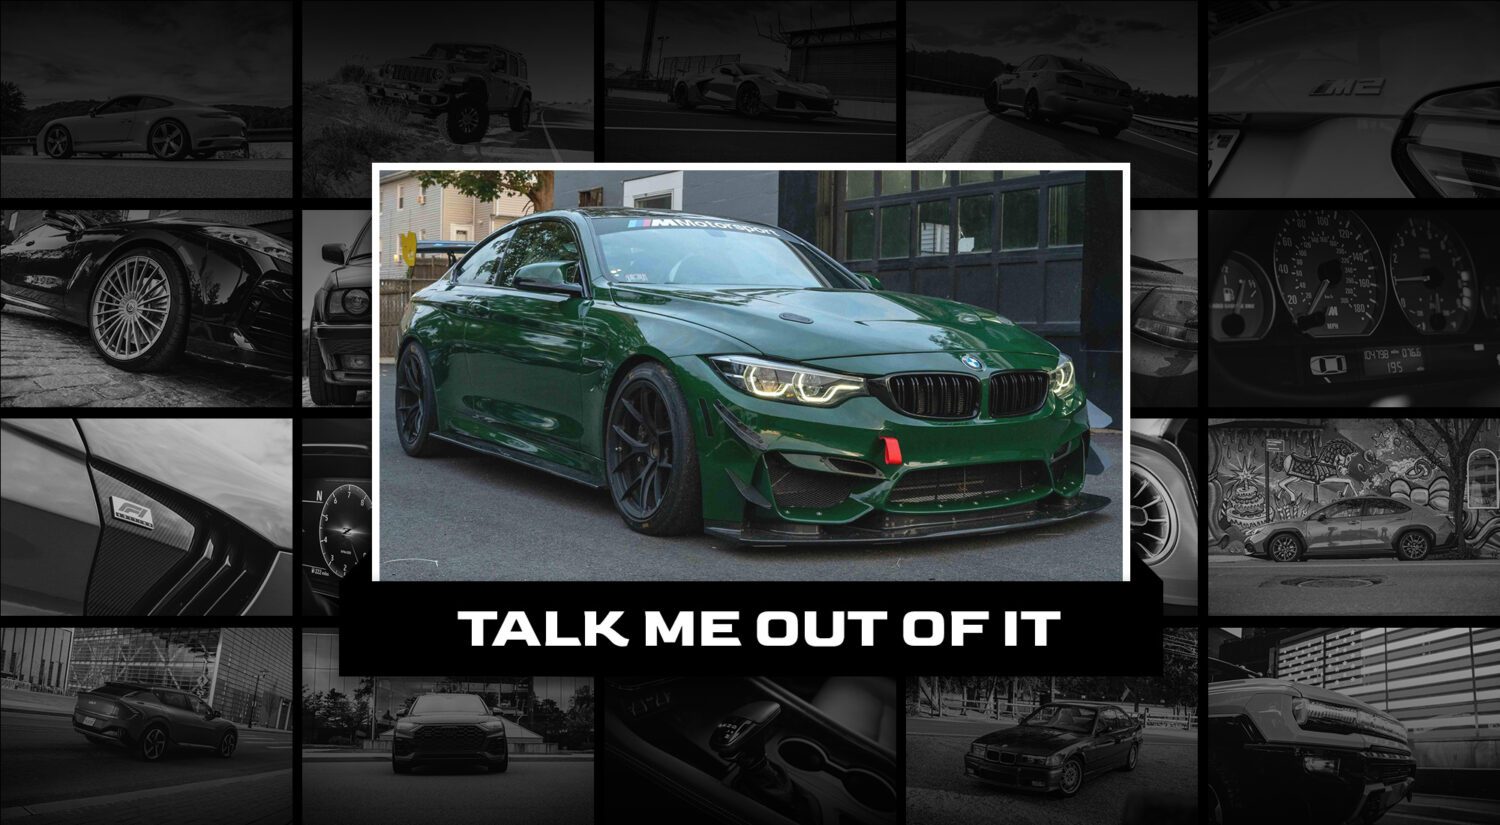 Buying the M4 of someone else’s dreams